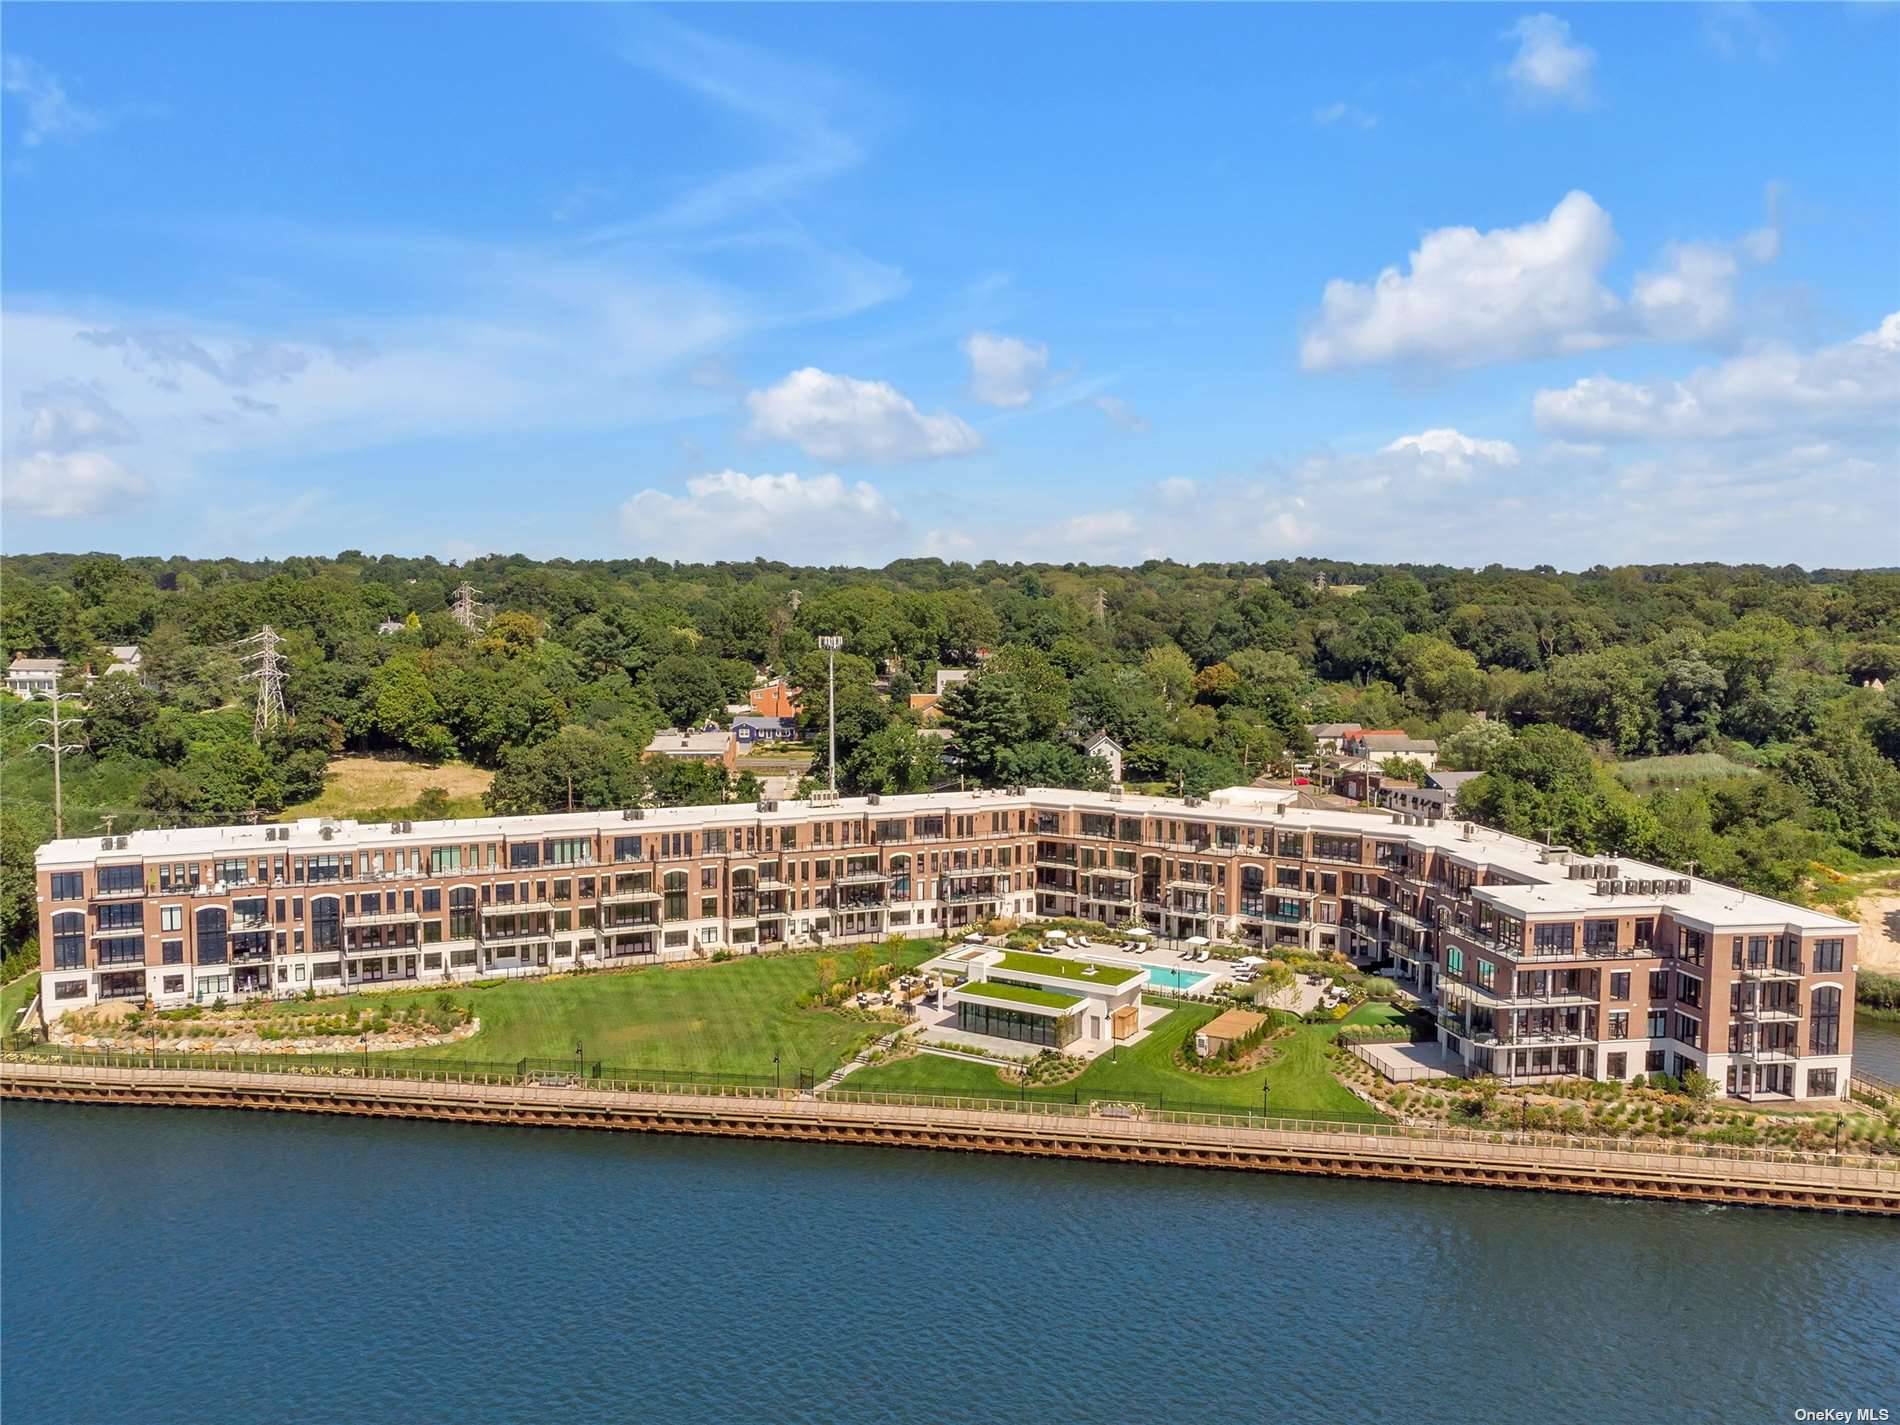 New luxury waterfront condos on Long Island's North Shore facing Hempstead Harbor and the Long Island Sound.